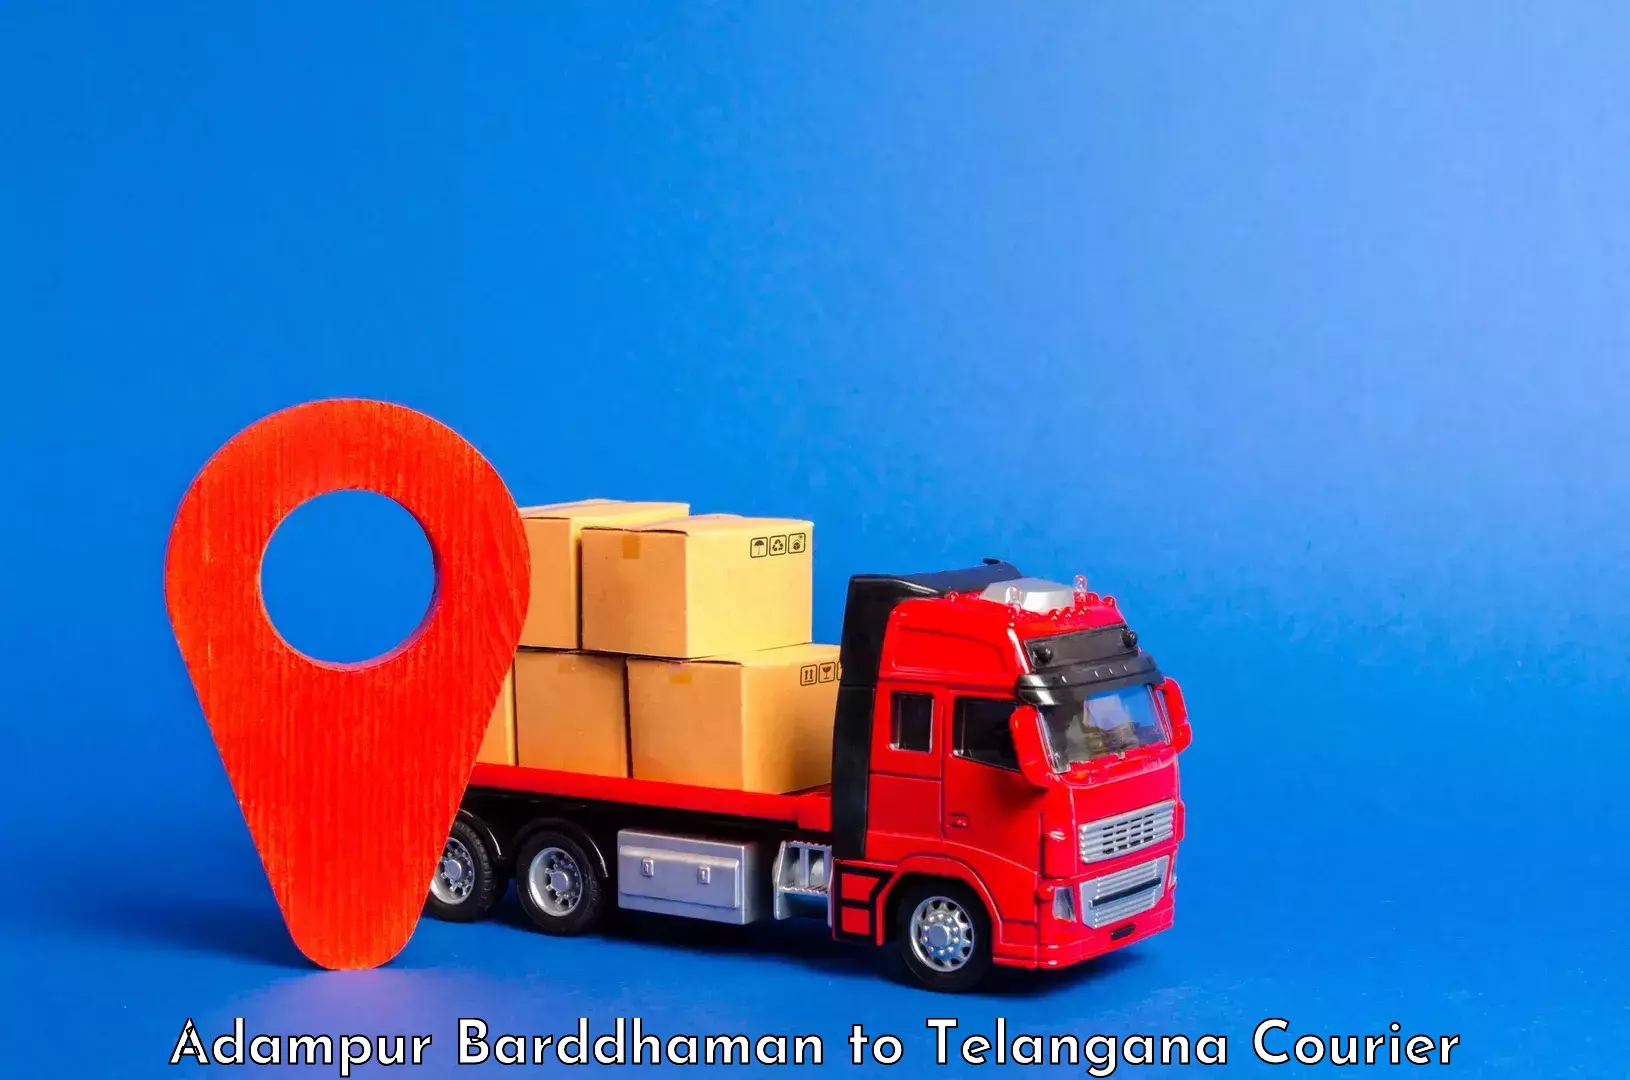 Luggage storage and delivery Adampur Barddhaman to Bhadrachalam